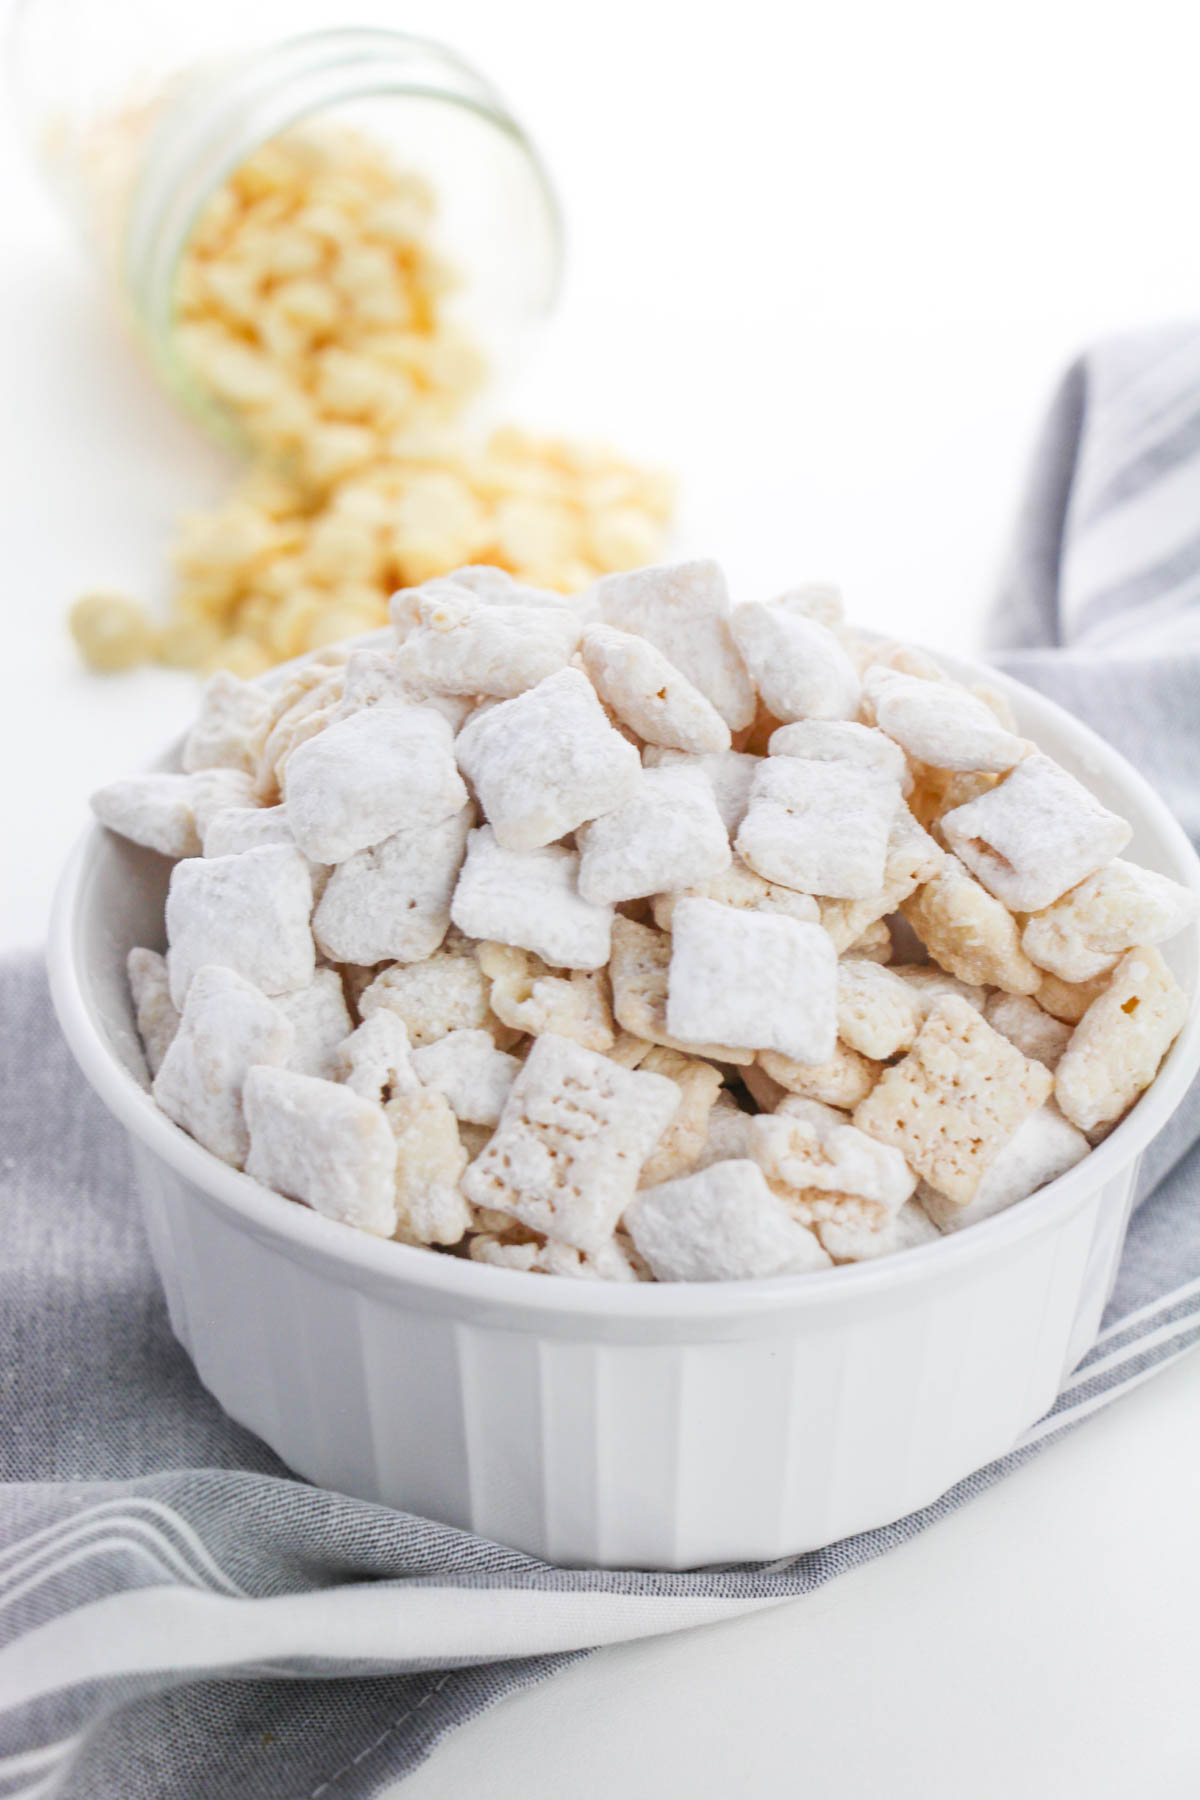 A white bowl of white chocolate puppy chow in front of a napkin.